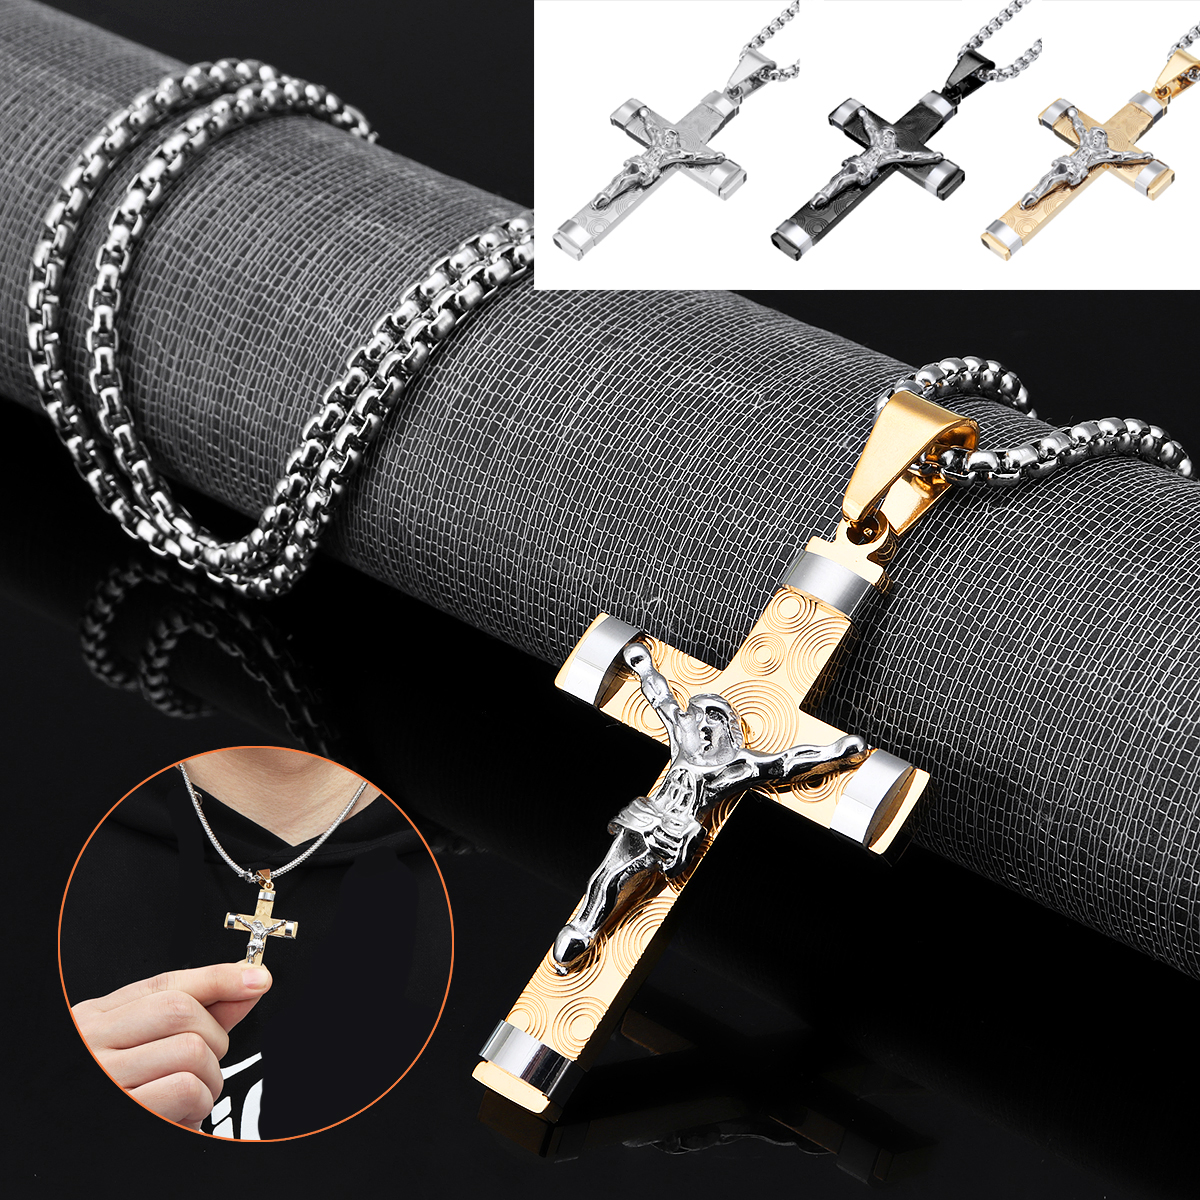 

Stainless Steel Christ Jesus Cross Crucifix Patterned Pendant Necklace Chain